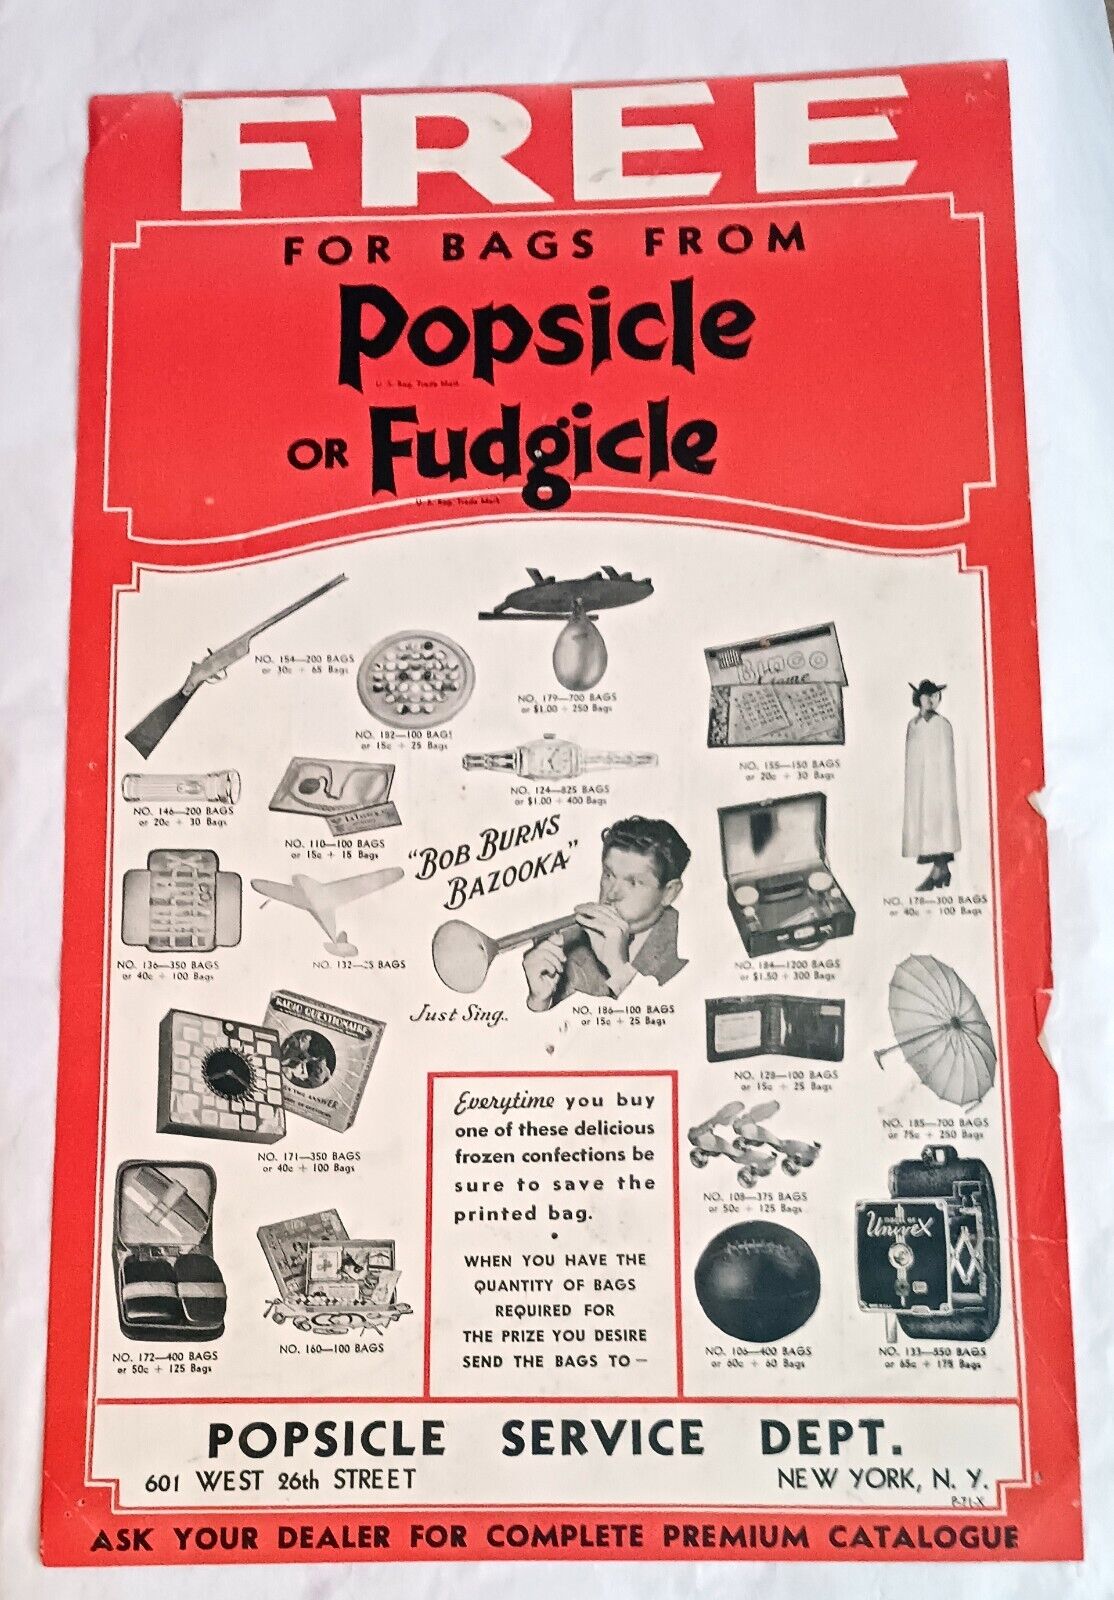 Rare Popsicle Fudgicle Vintage Advertising Poster Save Bags Get Prizes